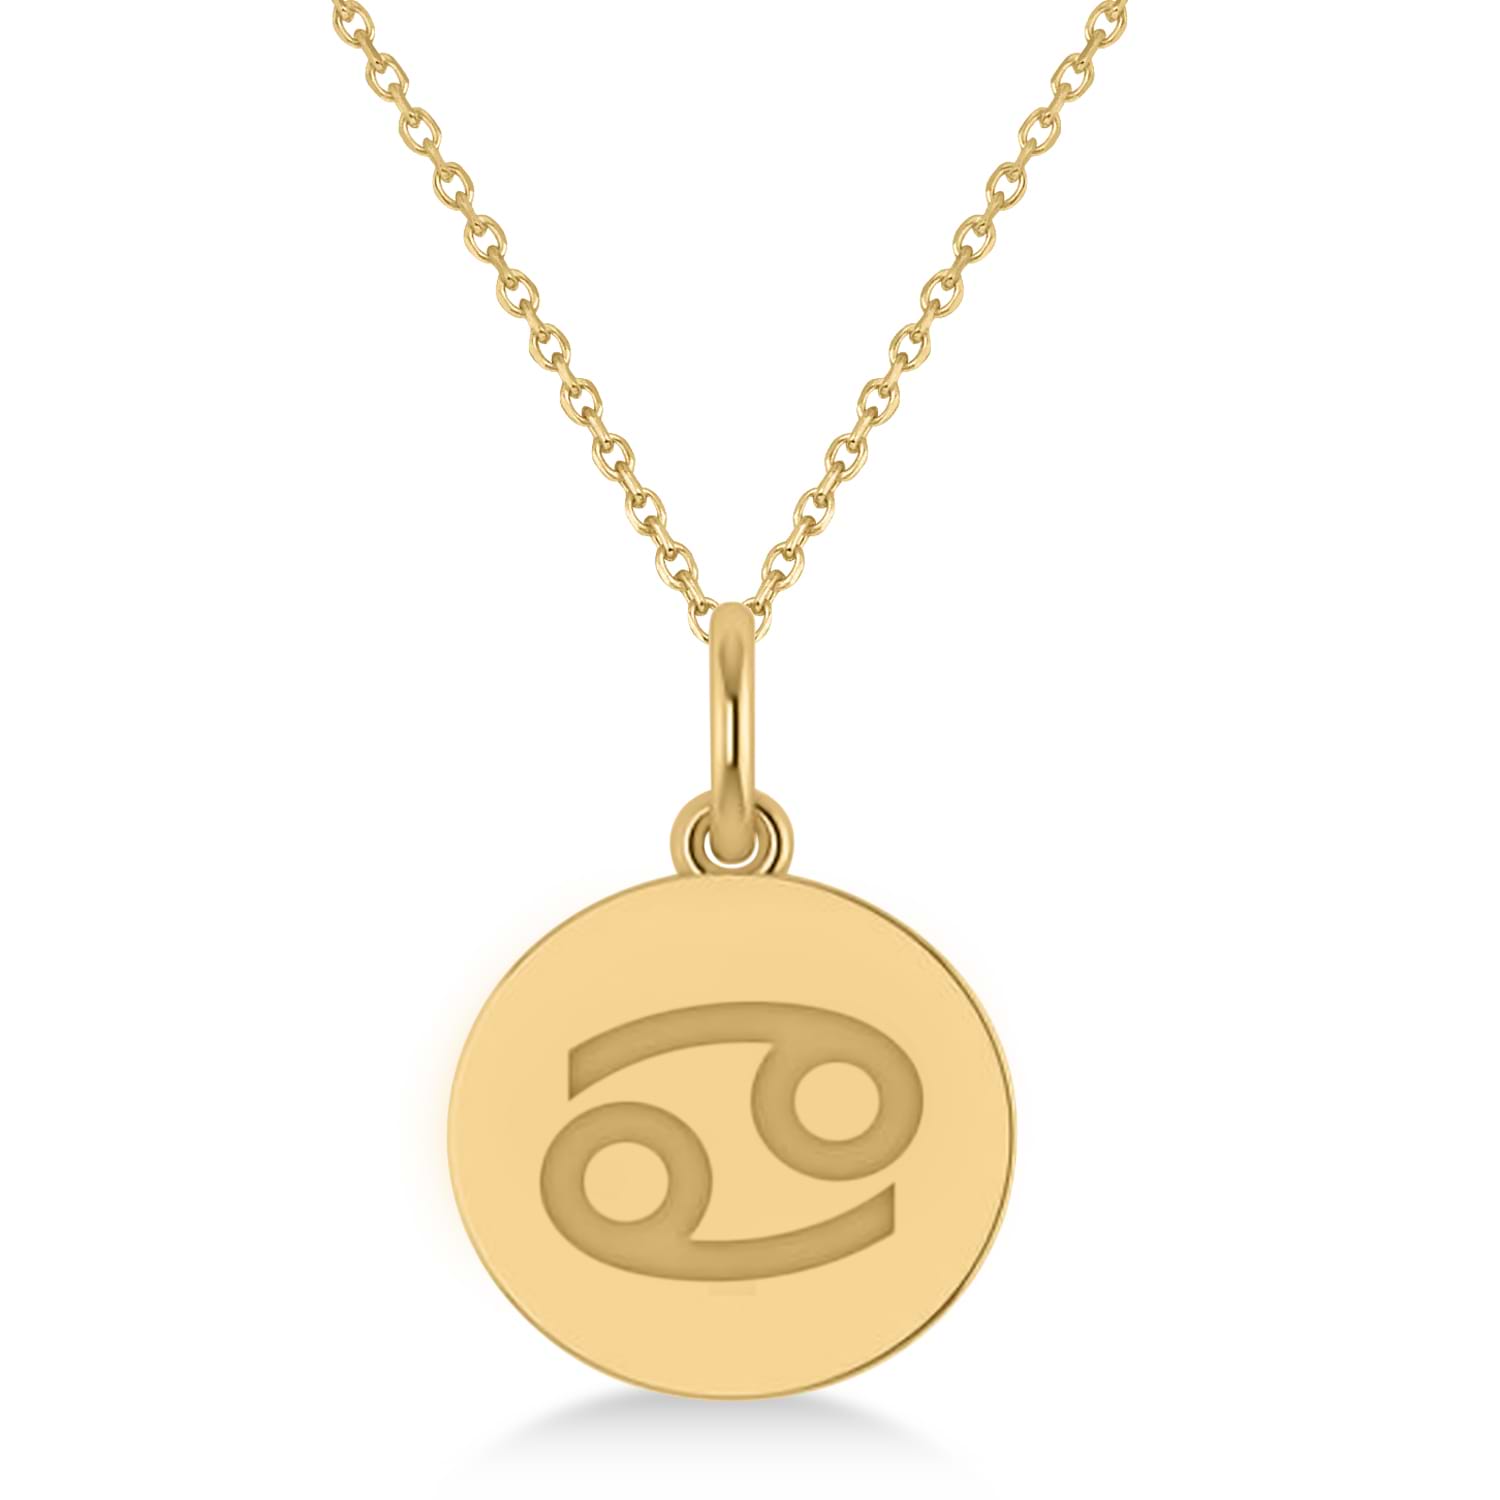 Cancer Disk Zodiac Pendant Necklace 14k Yellow Gold